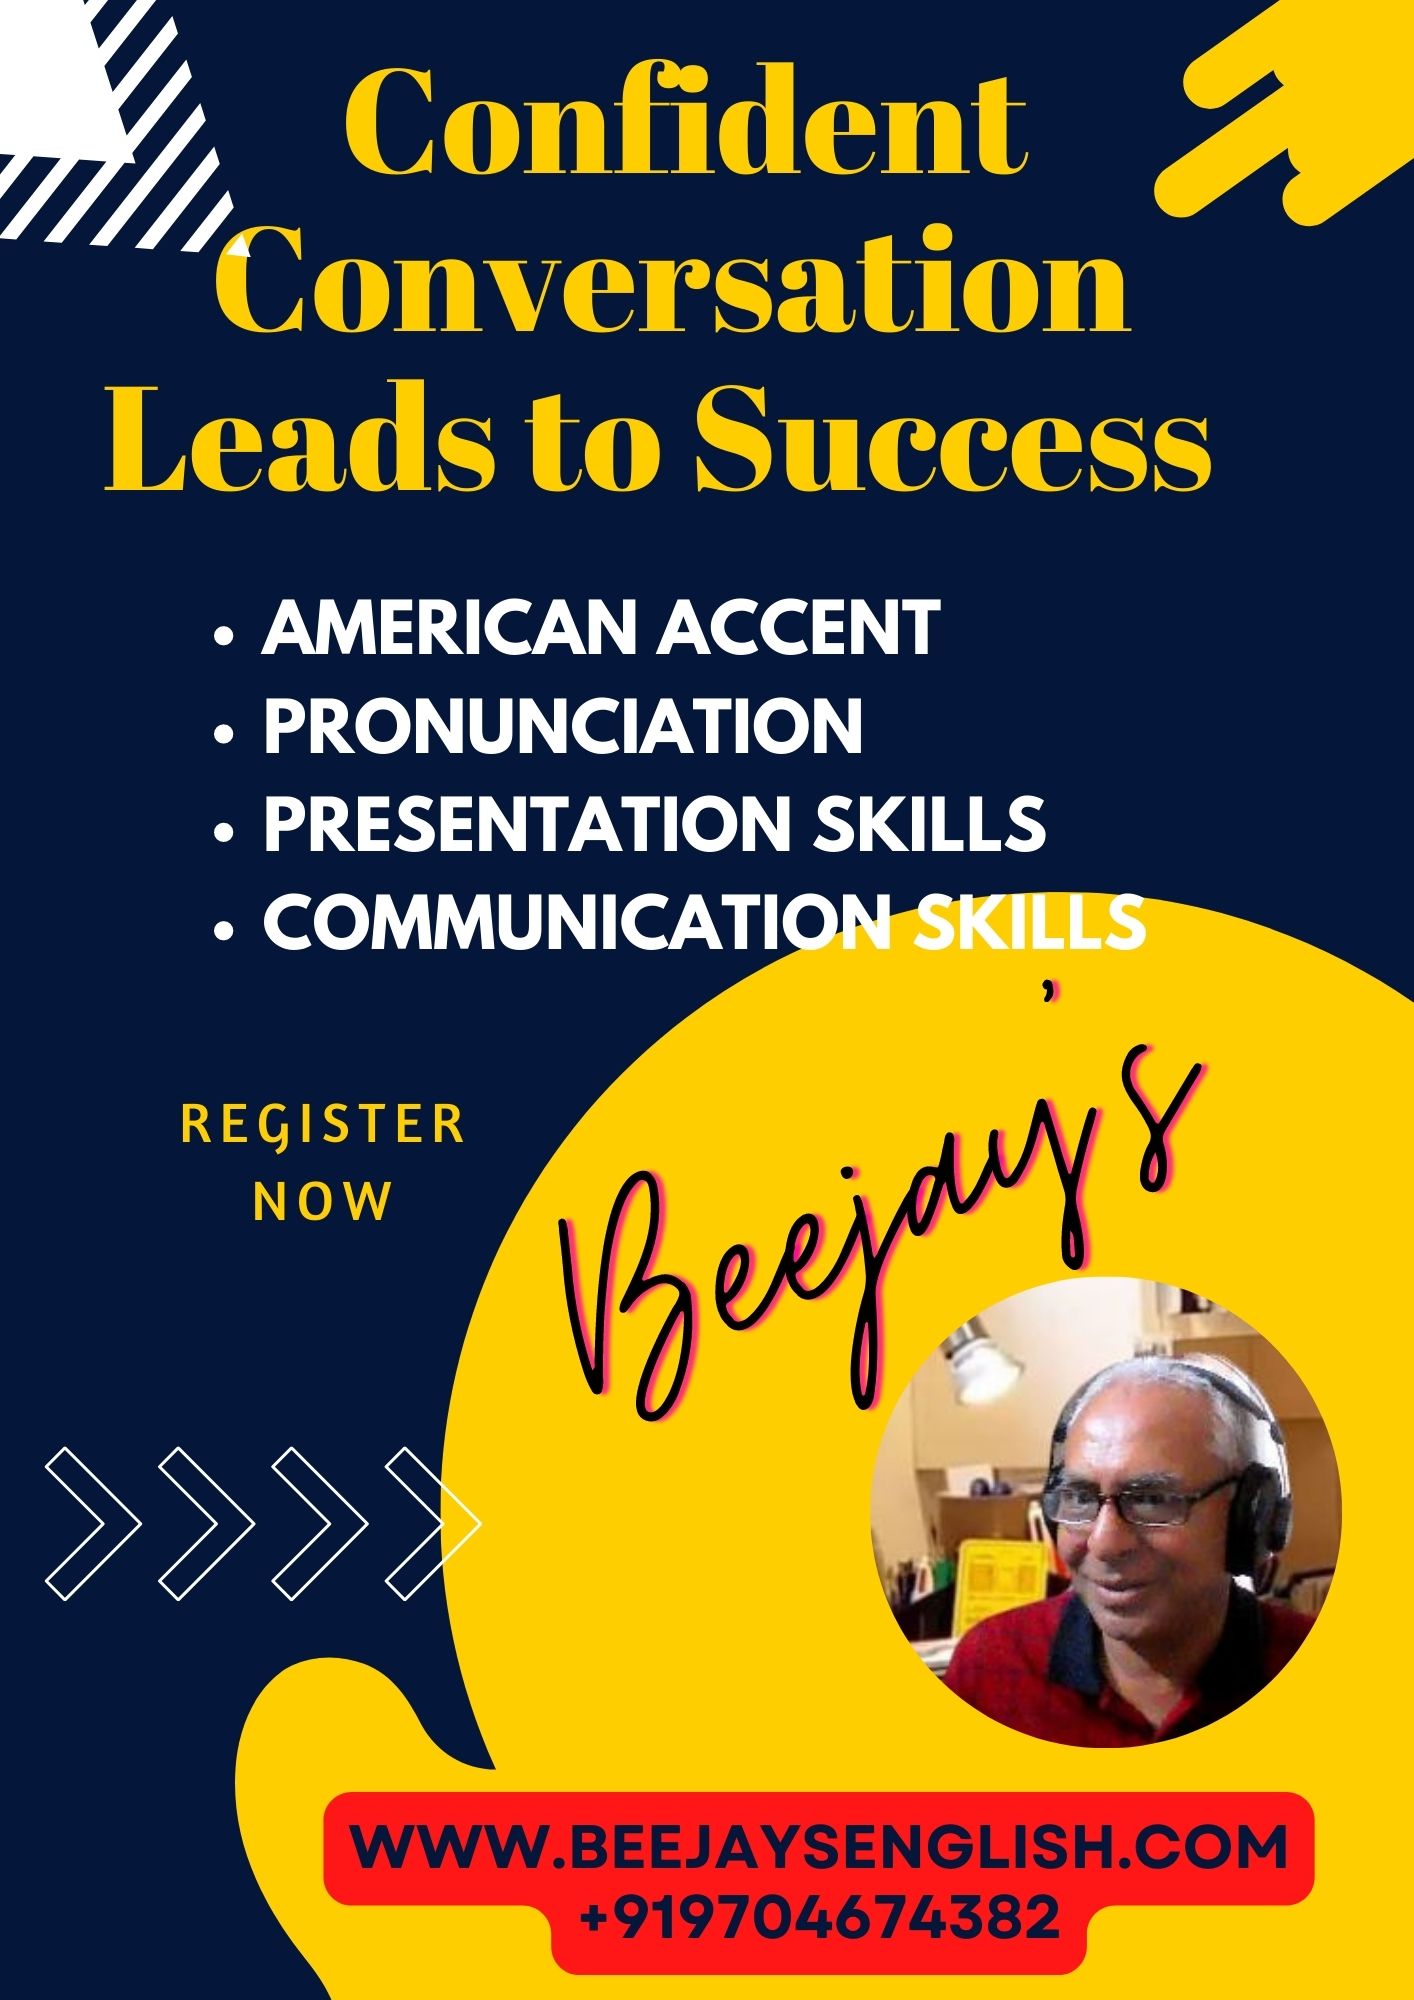 Beejays Online American Accent for Senior ManagersEducation and LearningCoaching ClassesWest DelhiDwarka